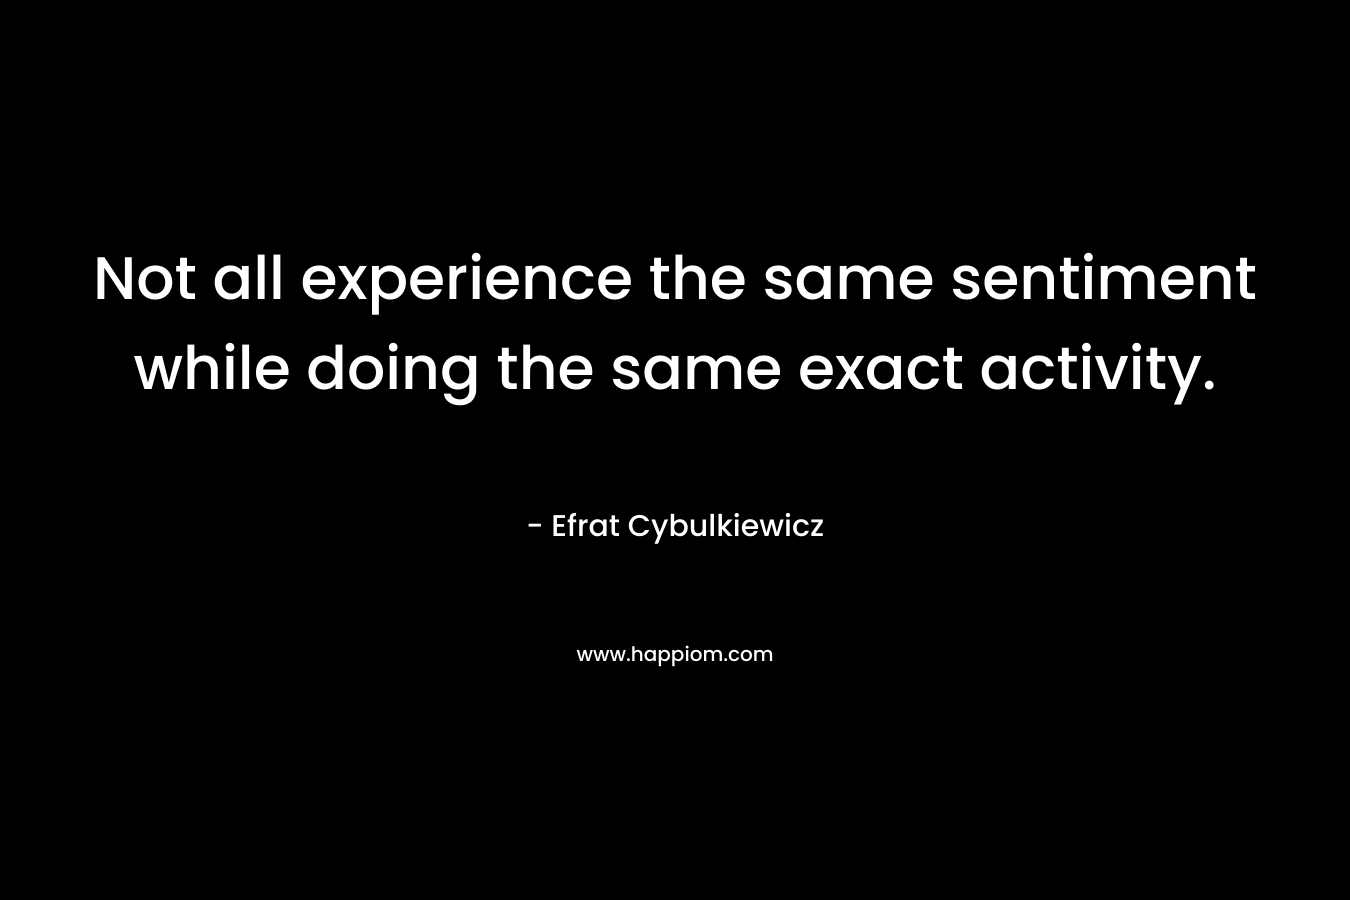 Not all experience the same sentiment while doing the same exact activity. – Efrat Cybulkiewicz